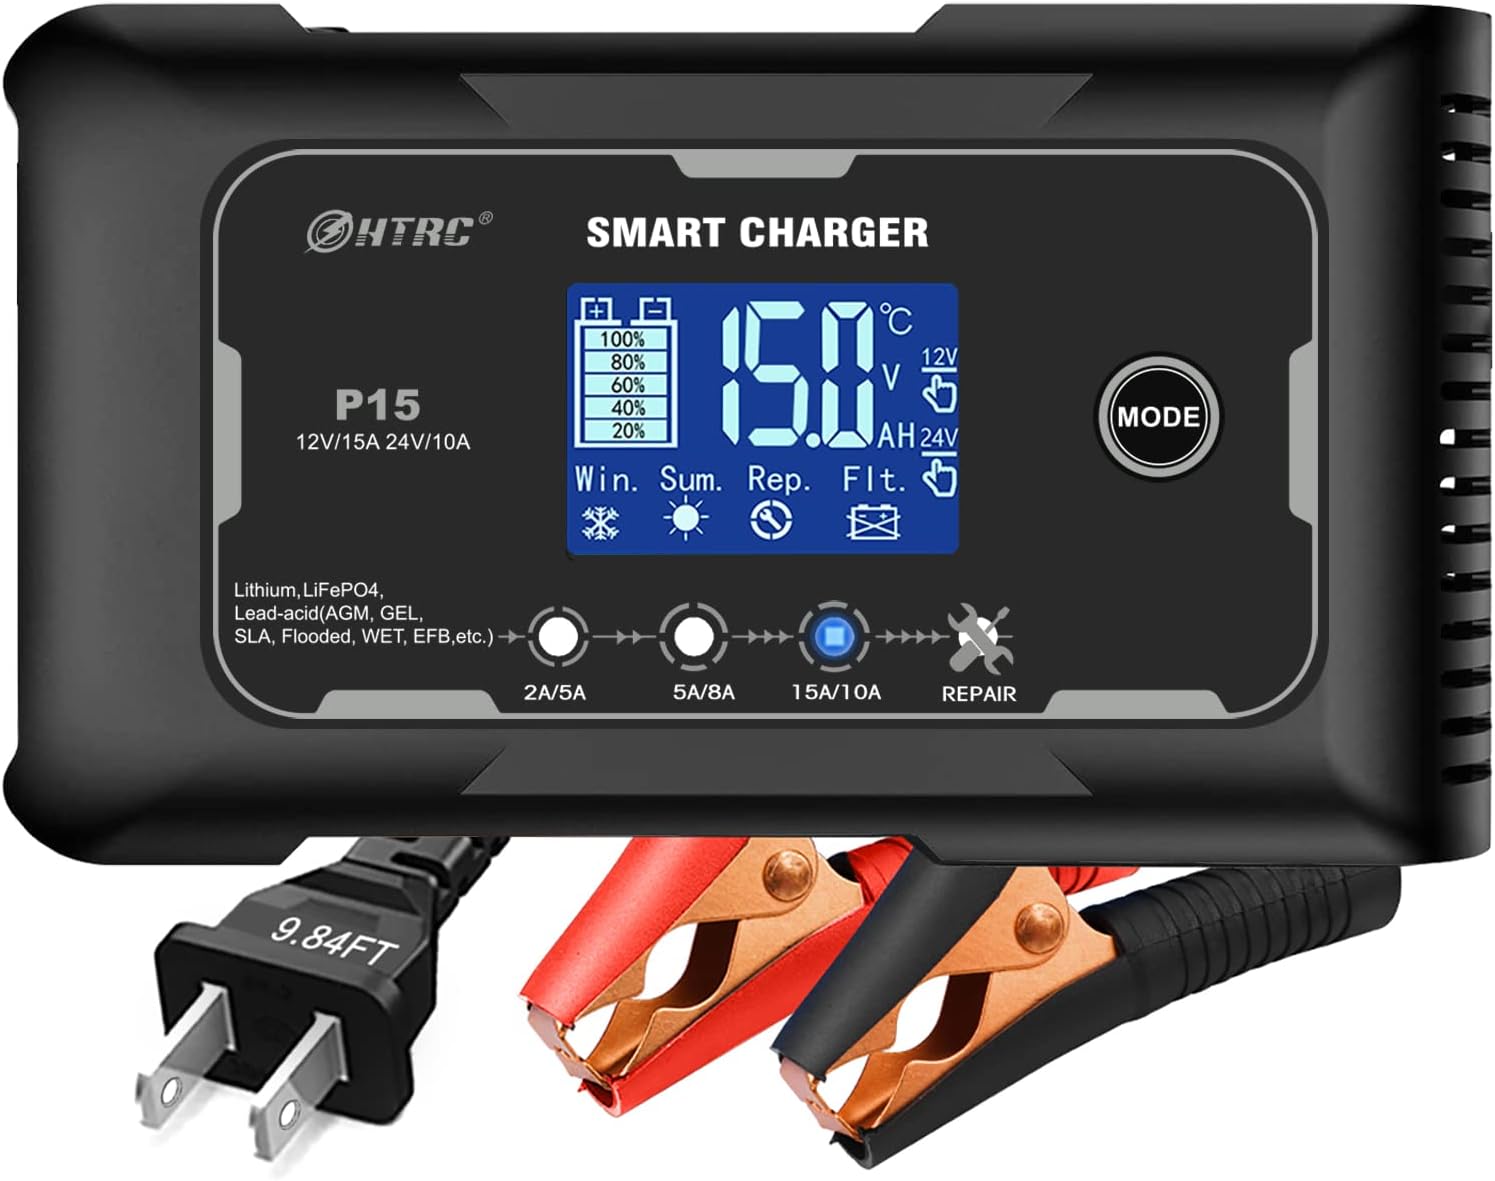 lifepo4 charger 15-Amp Fully-Automatic Smart Charger,12V and 24V Battery Charger,12V/15A 24V/10A Lead-Acid(AGM/Gel/SLA)/Lithium lron LiFePO4 Trickle Charger,Pulse Repair Car Battery Charger,Deep cycle - Lifepo4 Charger Review